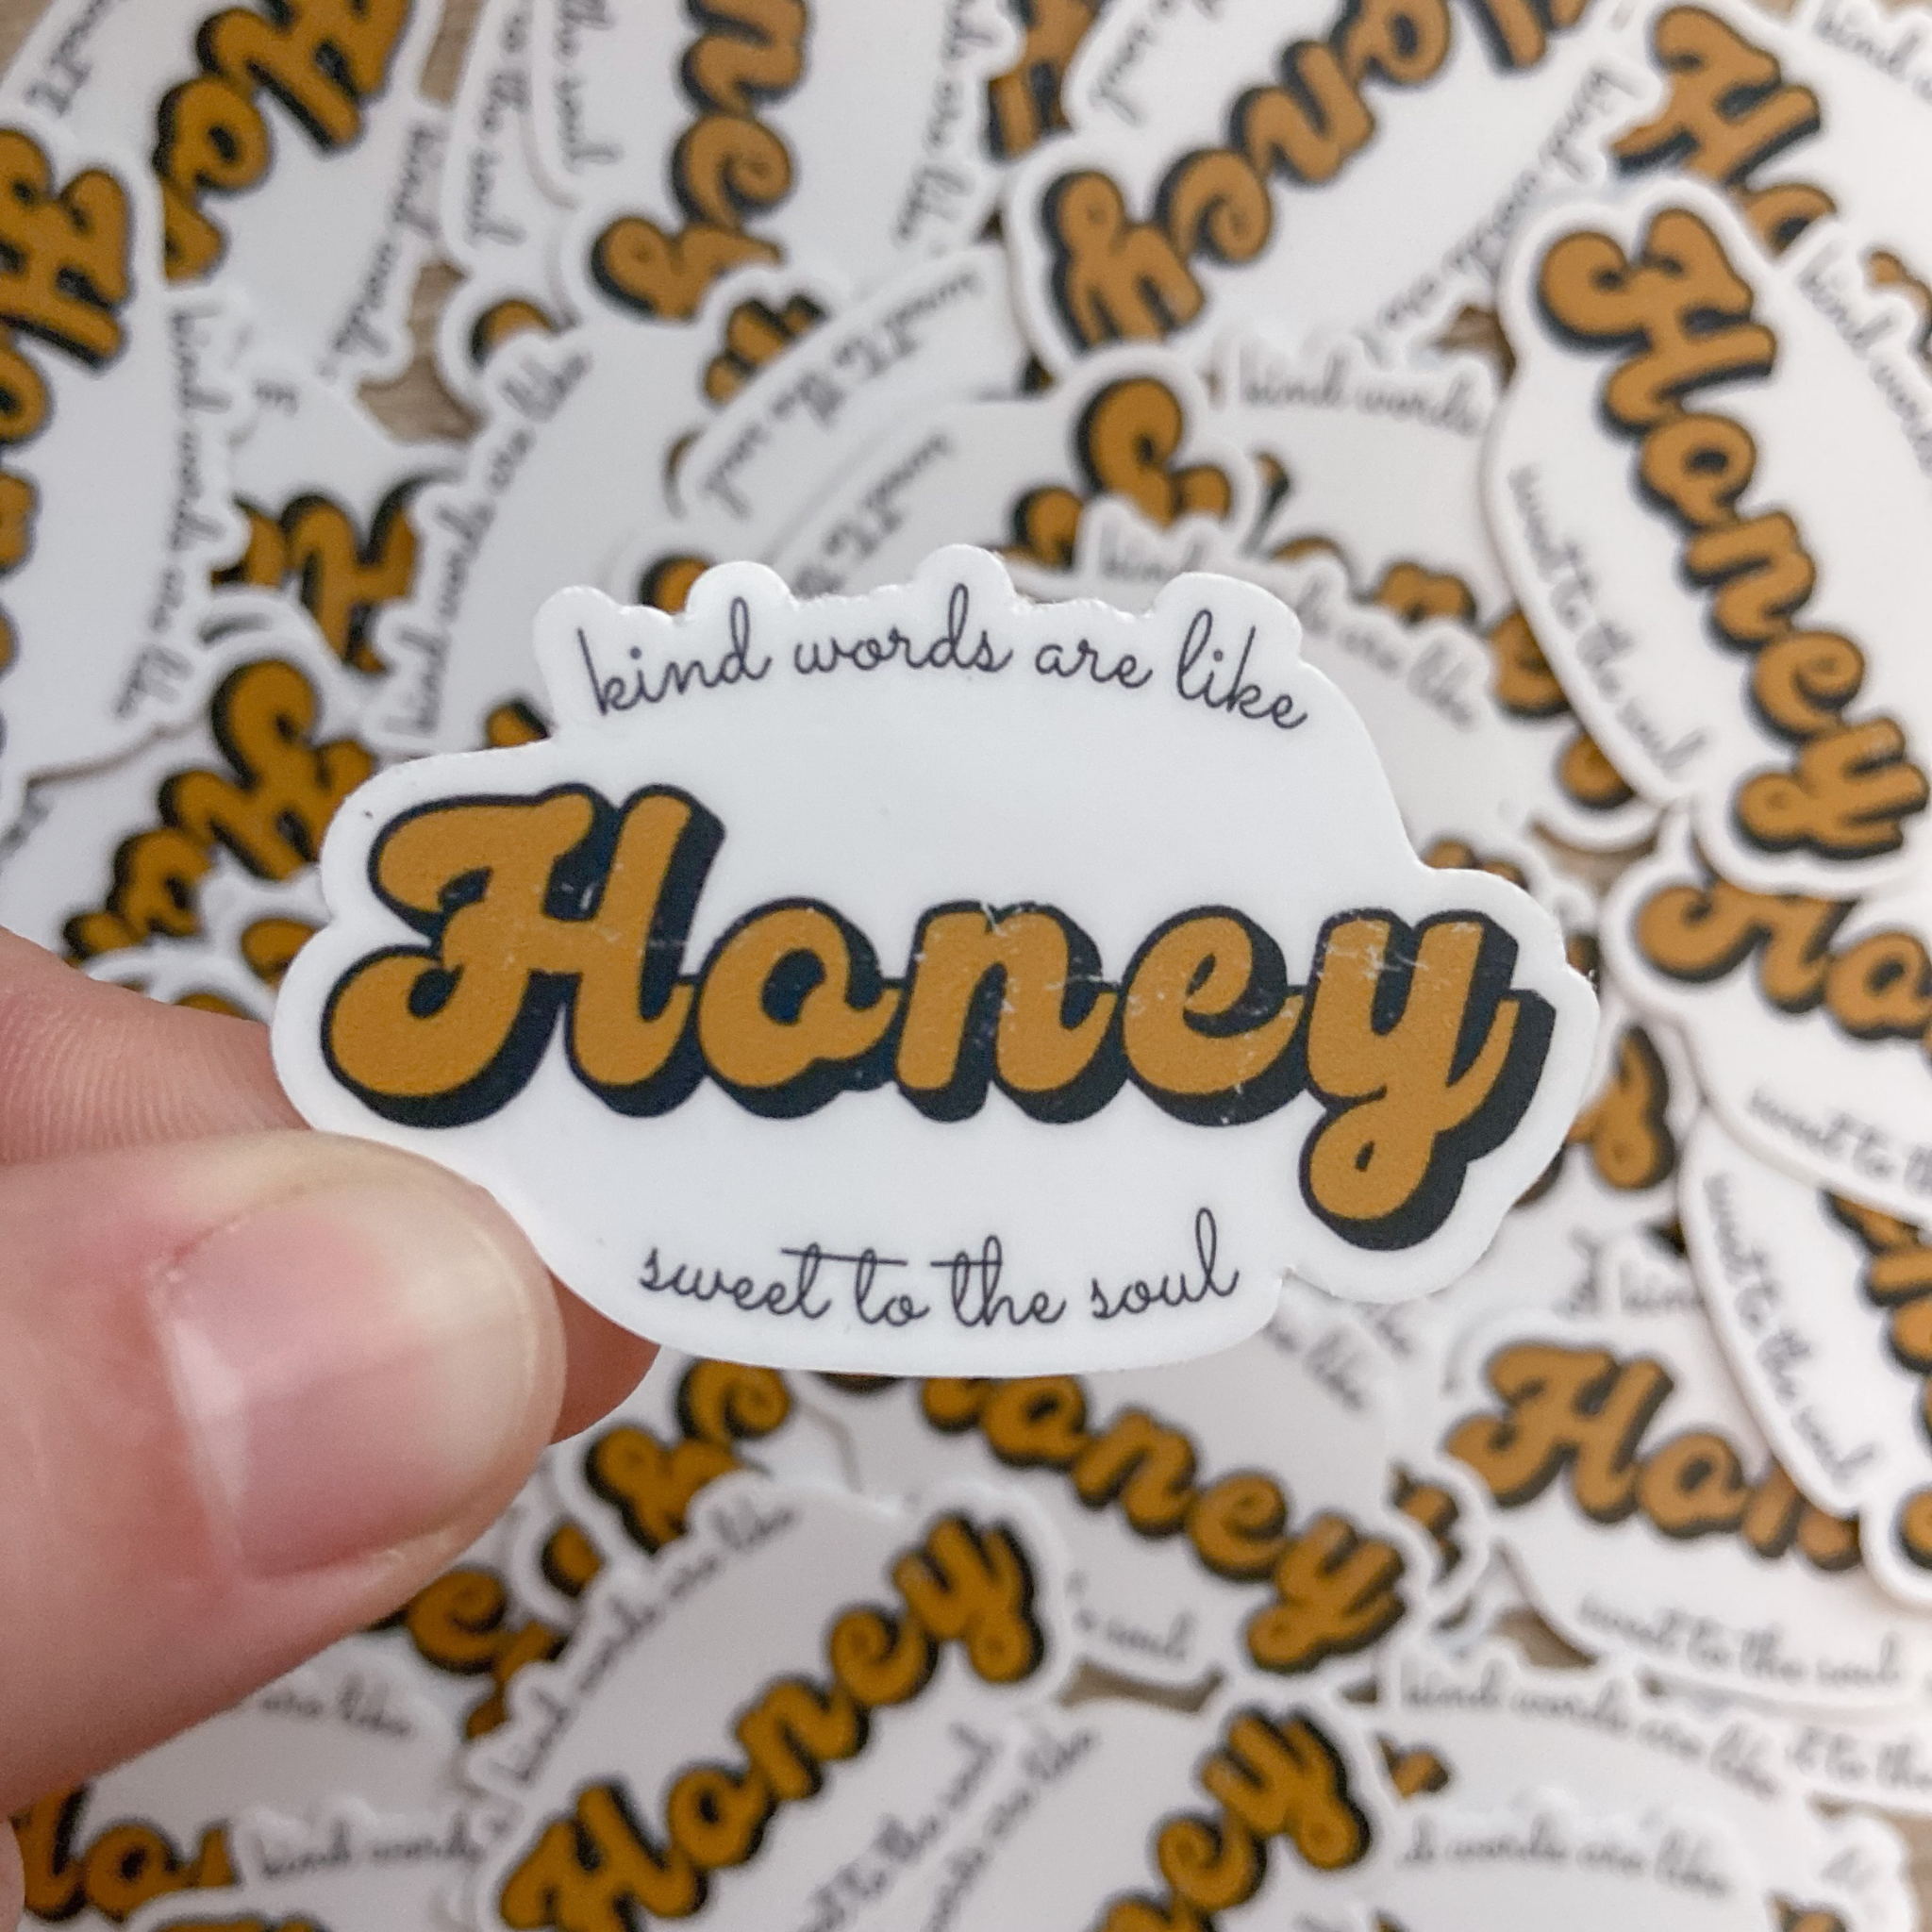 The words "kind words are like honey sweet to the soul" on a white sticker